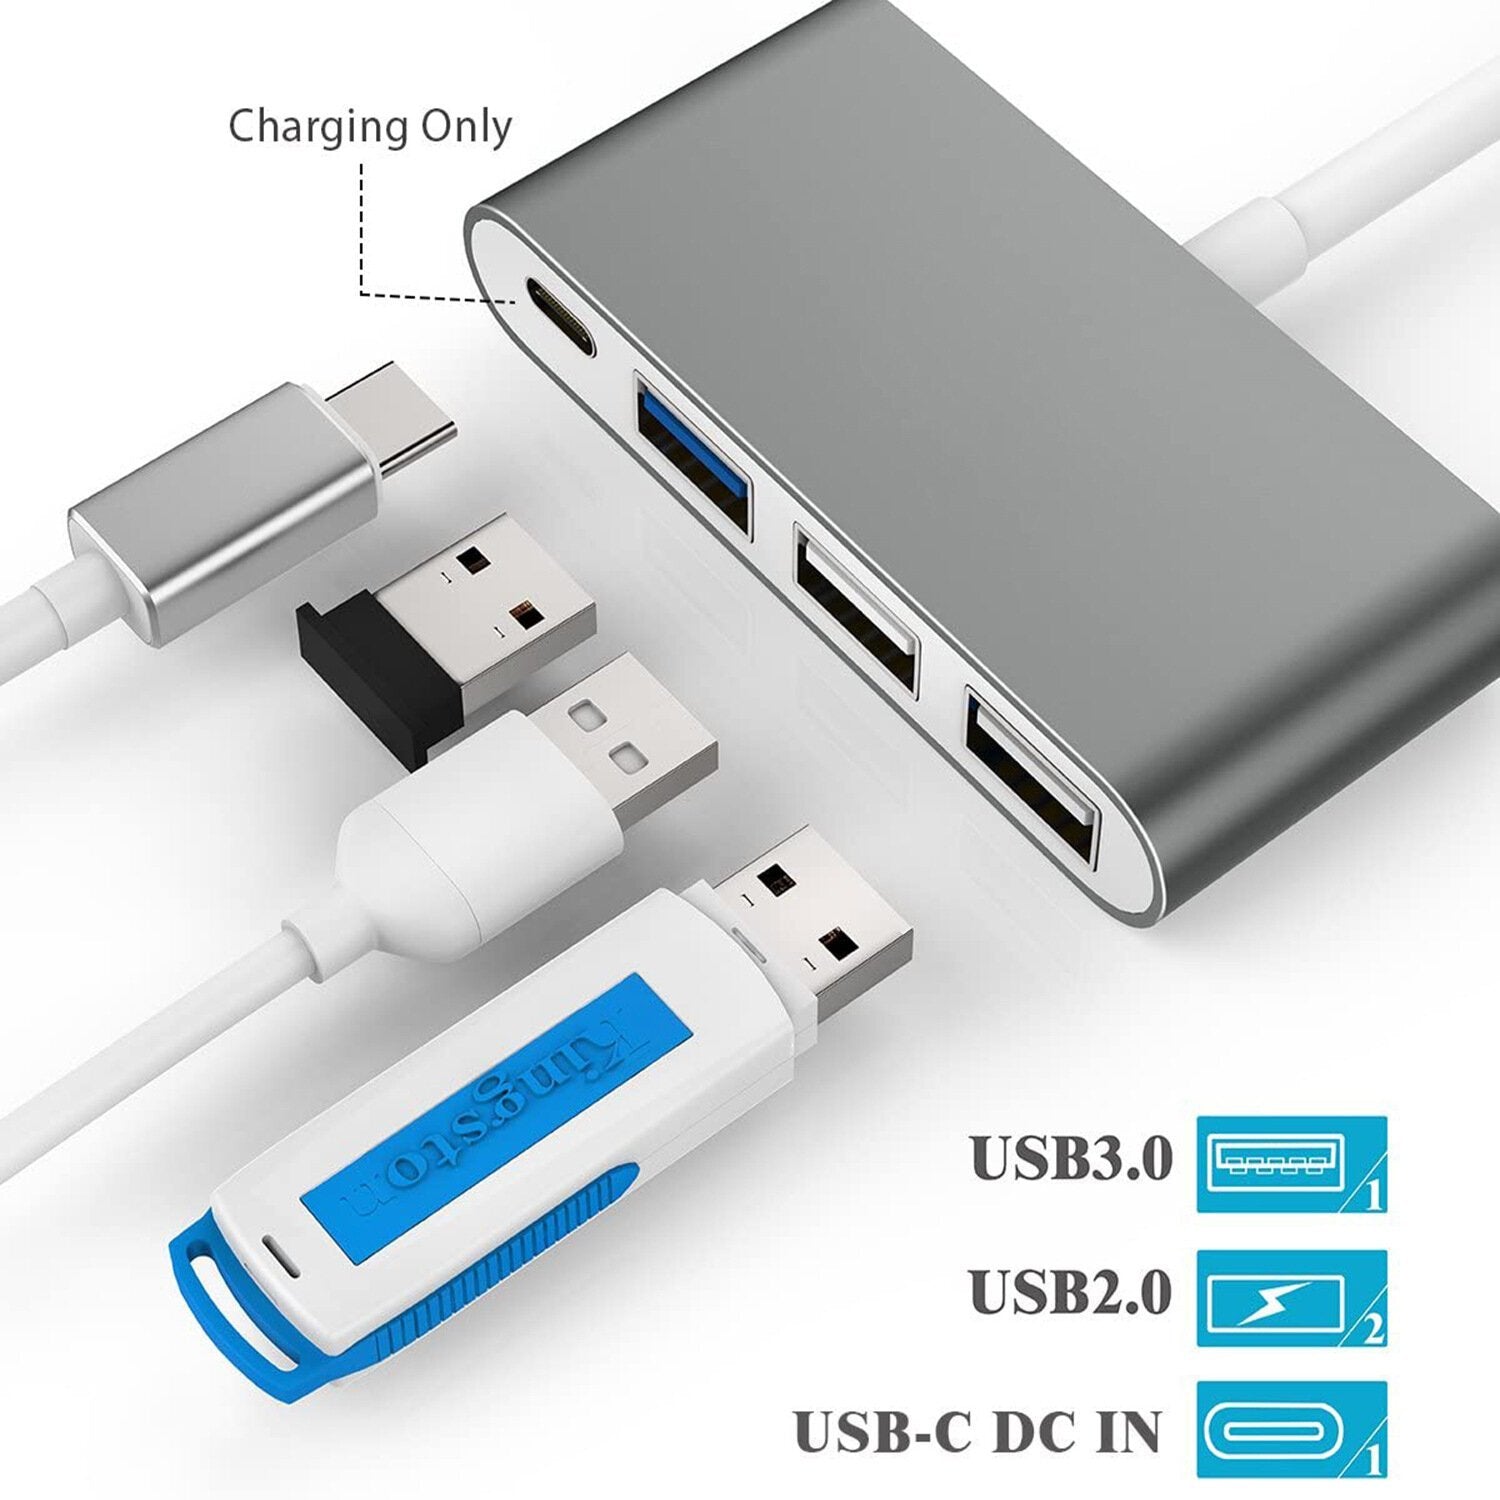 4-in-1 USB-C HUB Docking Station Adapter OTG Converter With USB-C PD Power Delivery USB 3.0 USB 2.0 *2 For Laptop Macbook